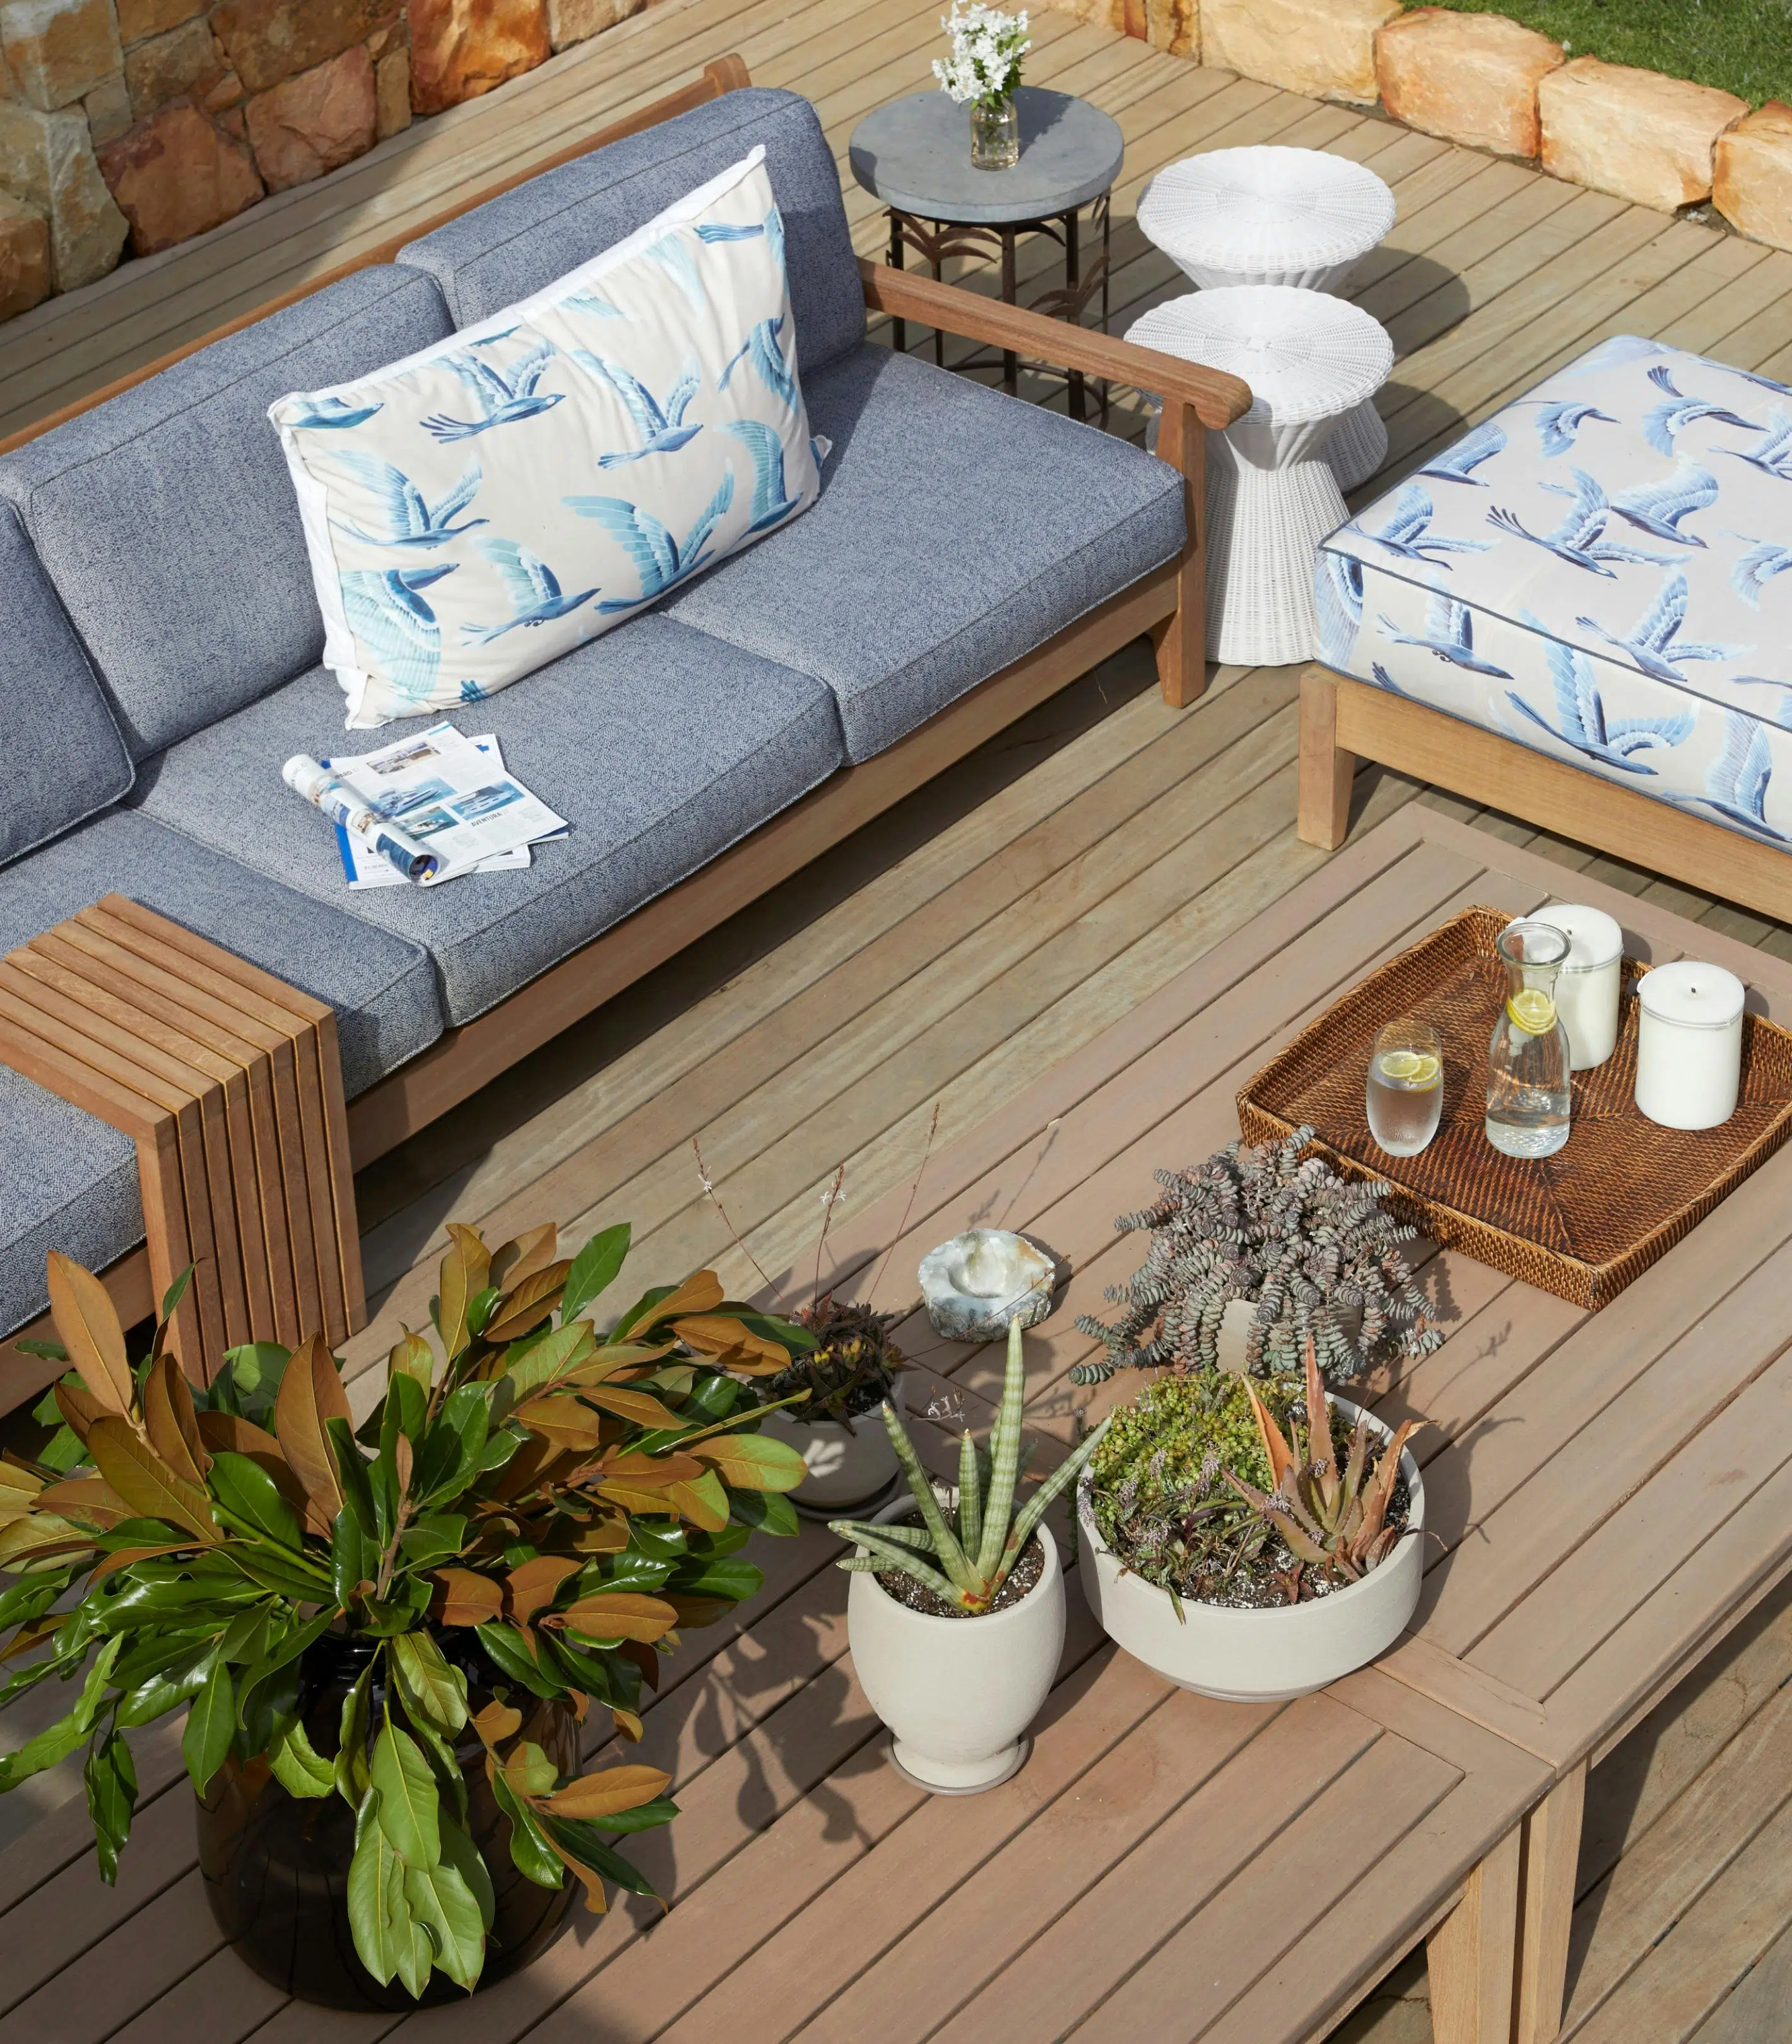 A collection of potted succulents stands on an outdoor table with a wooden appearance. Blue-upholstered outdoor furniture, a patterned ottoman and a collection of outdoor tables sit alongside it